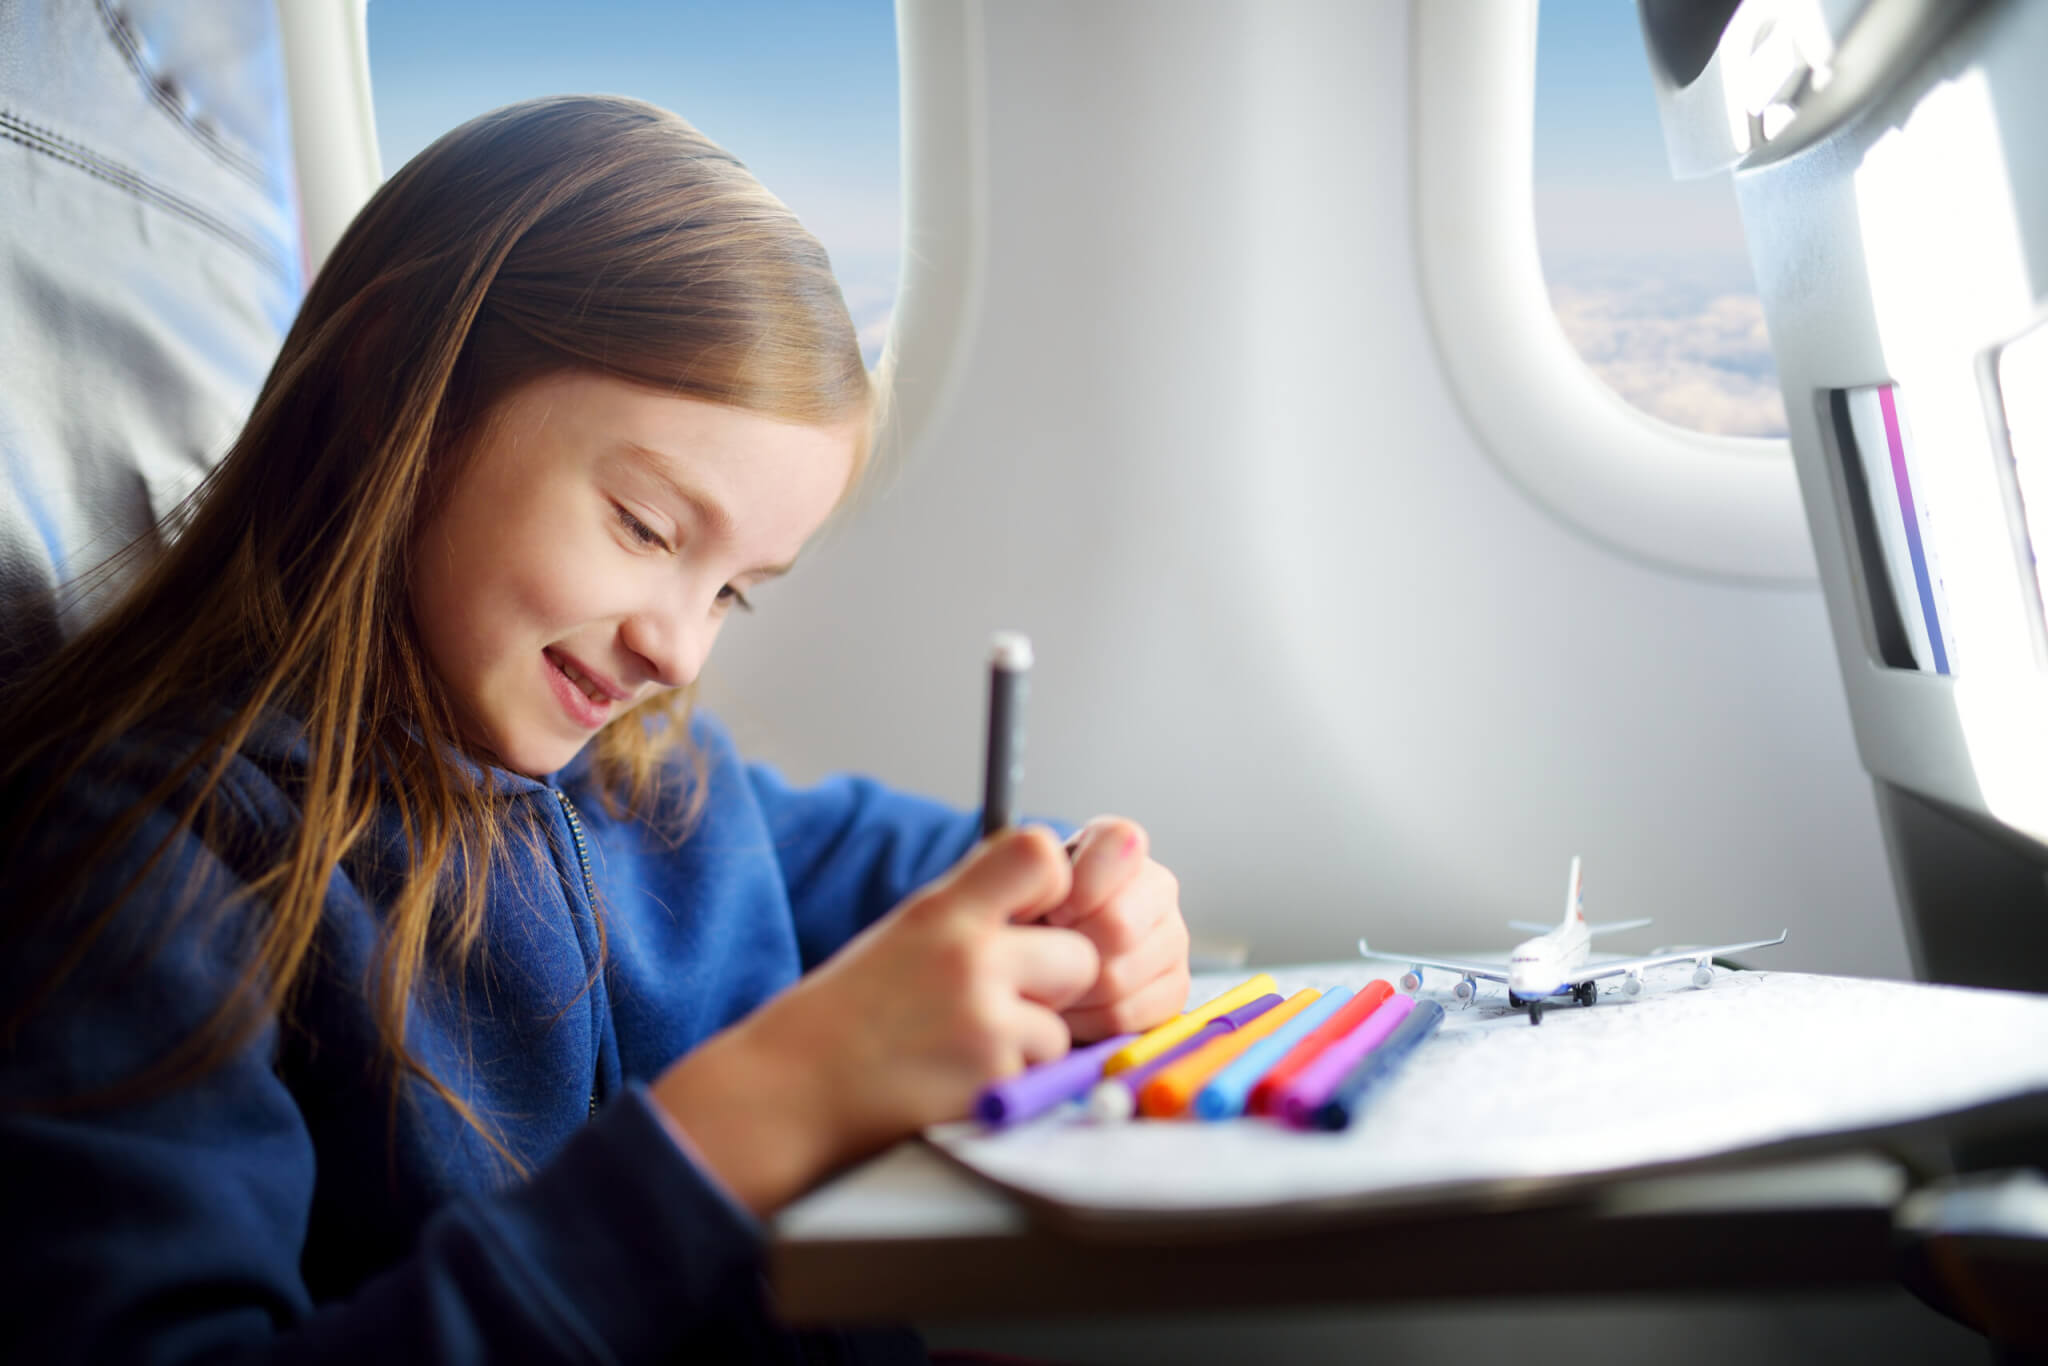 Young girl coloring while on an airplane flight.